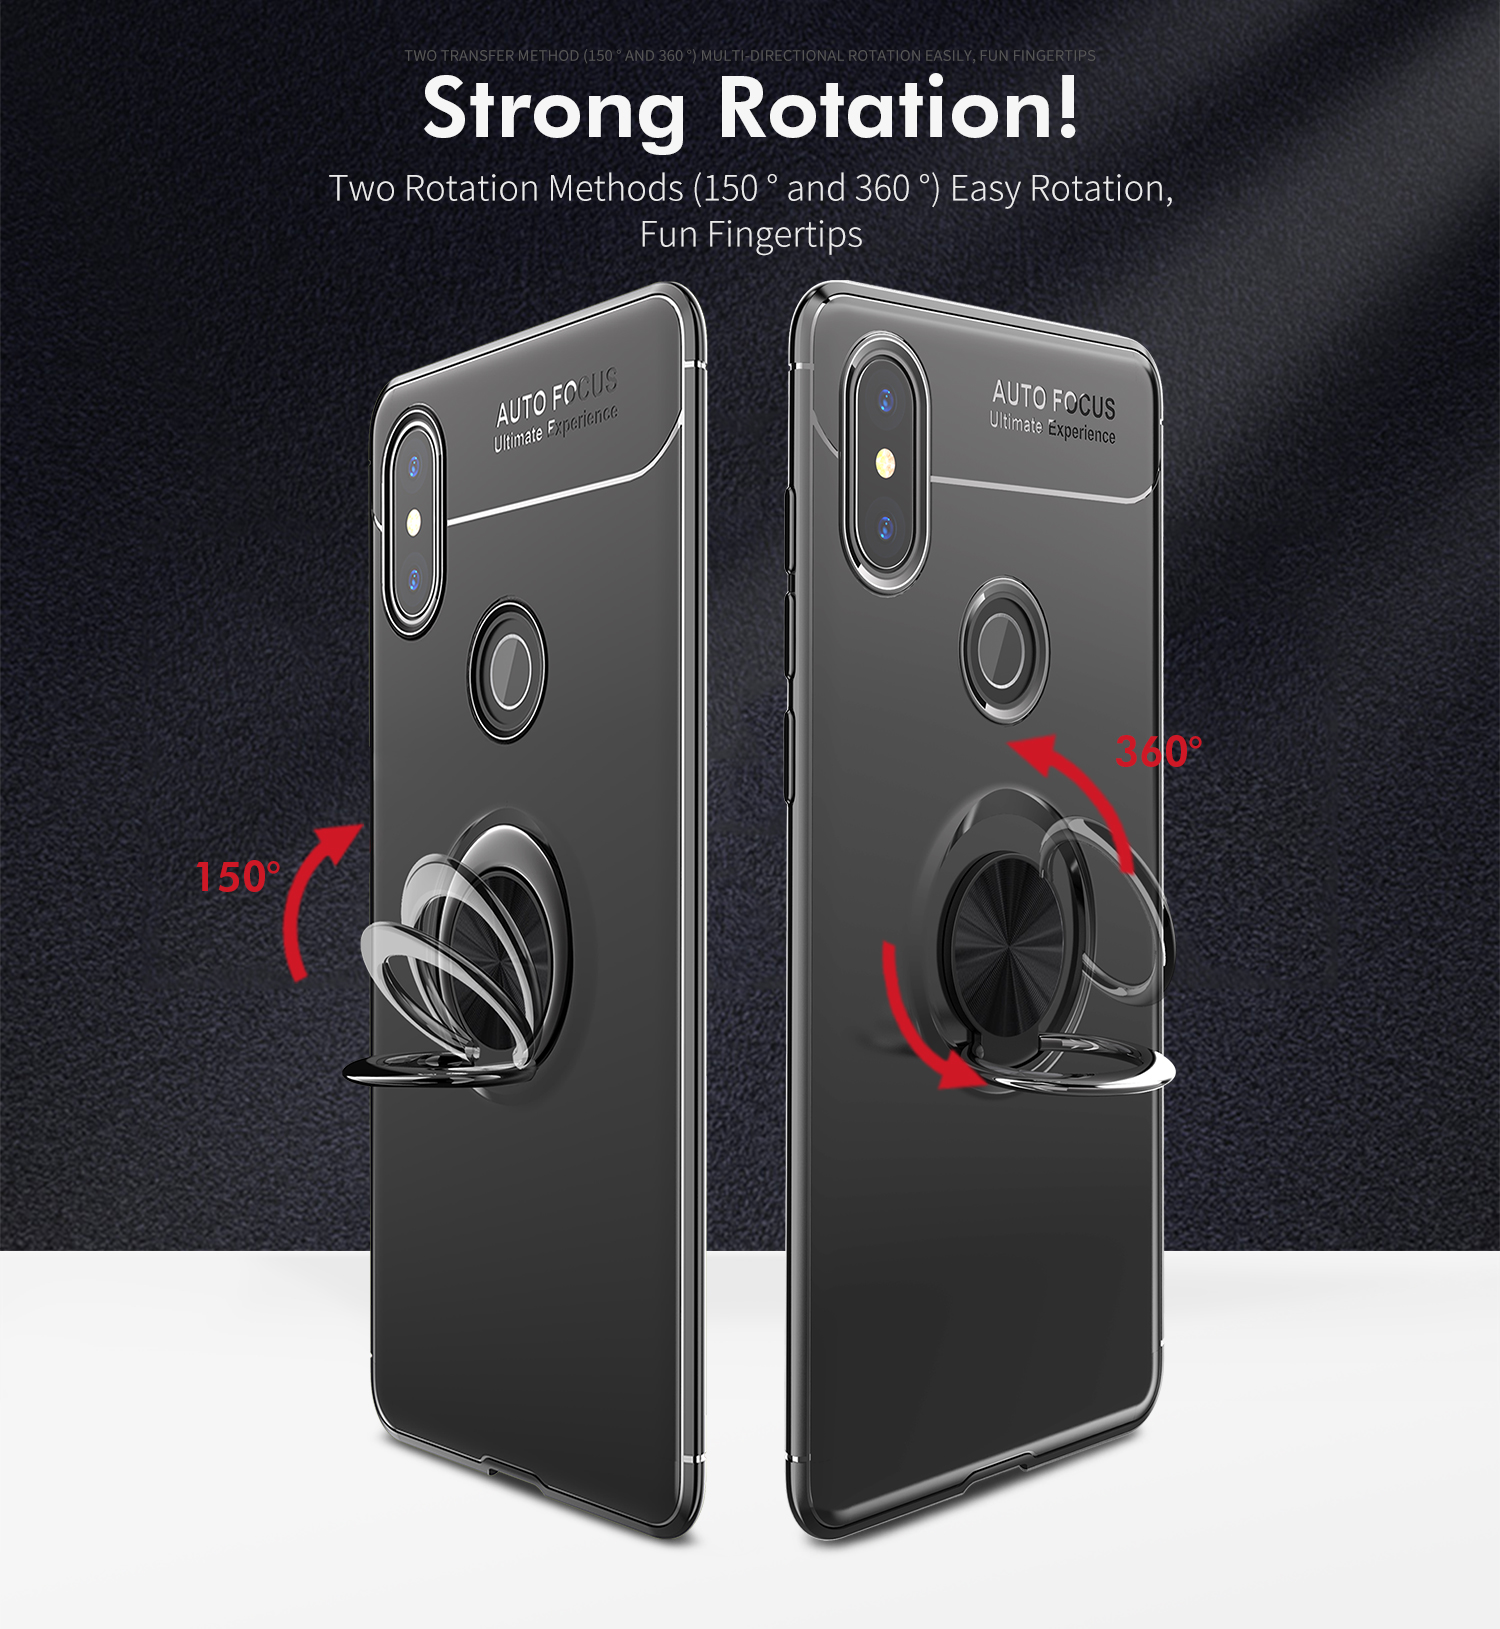 Bakeey-360deg-Adjustable-Metal-Ring-Kickstand-Magnetic-PC-Protective-Case-for-Xiaomi-Redmi-Note-6-Pr-1378687